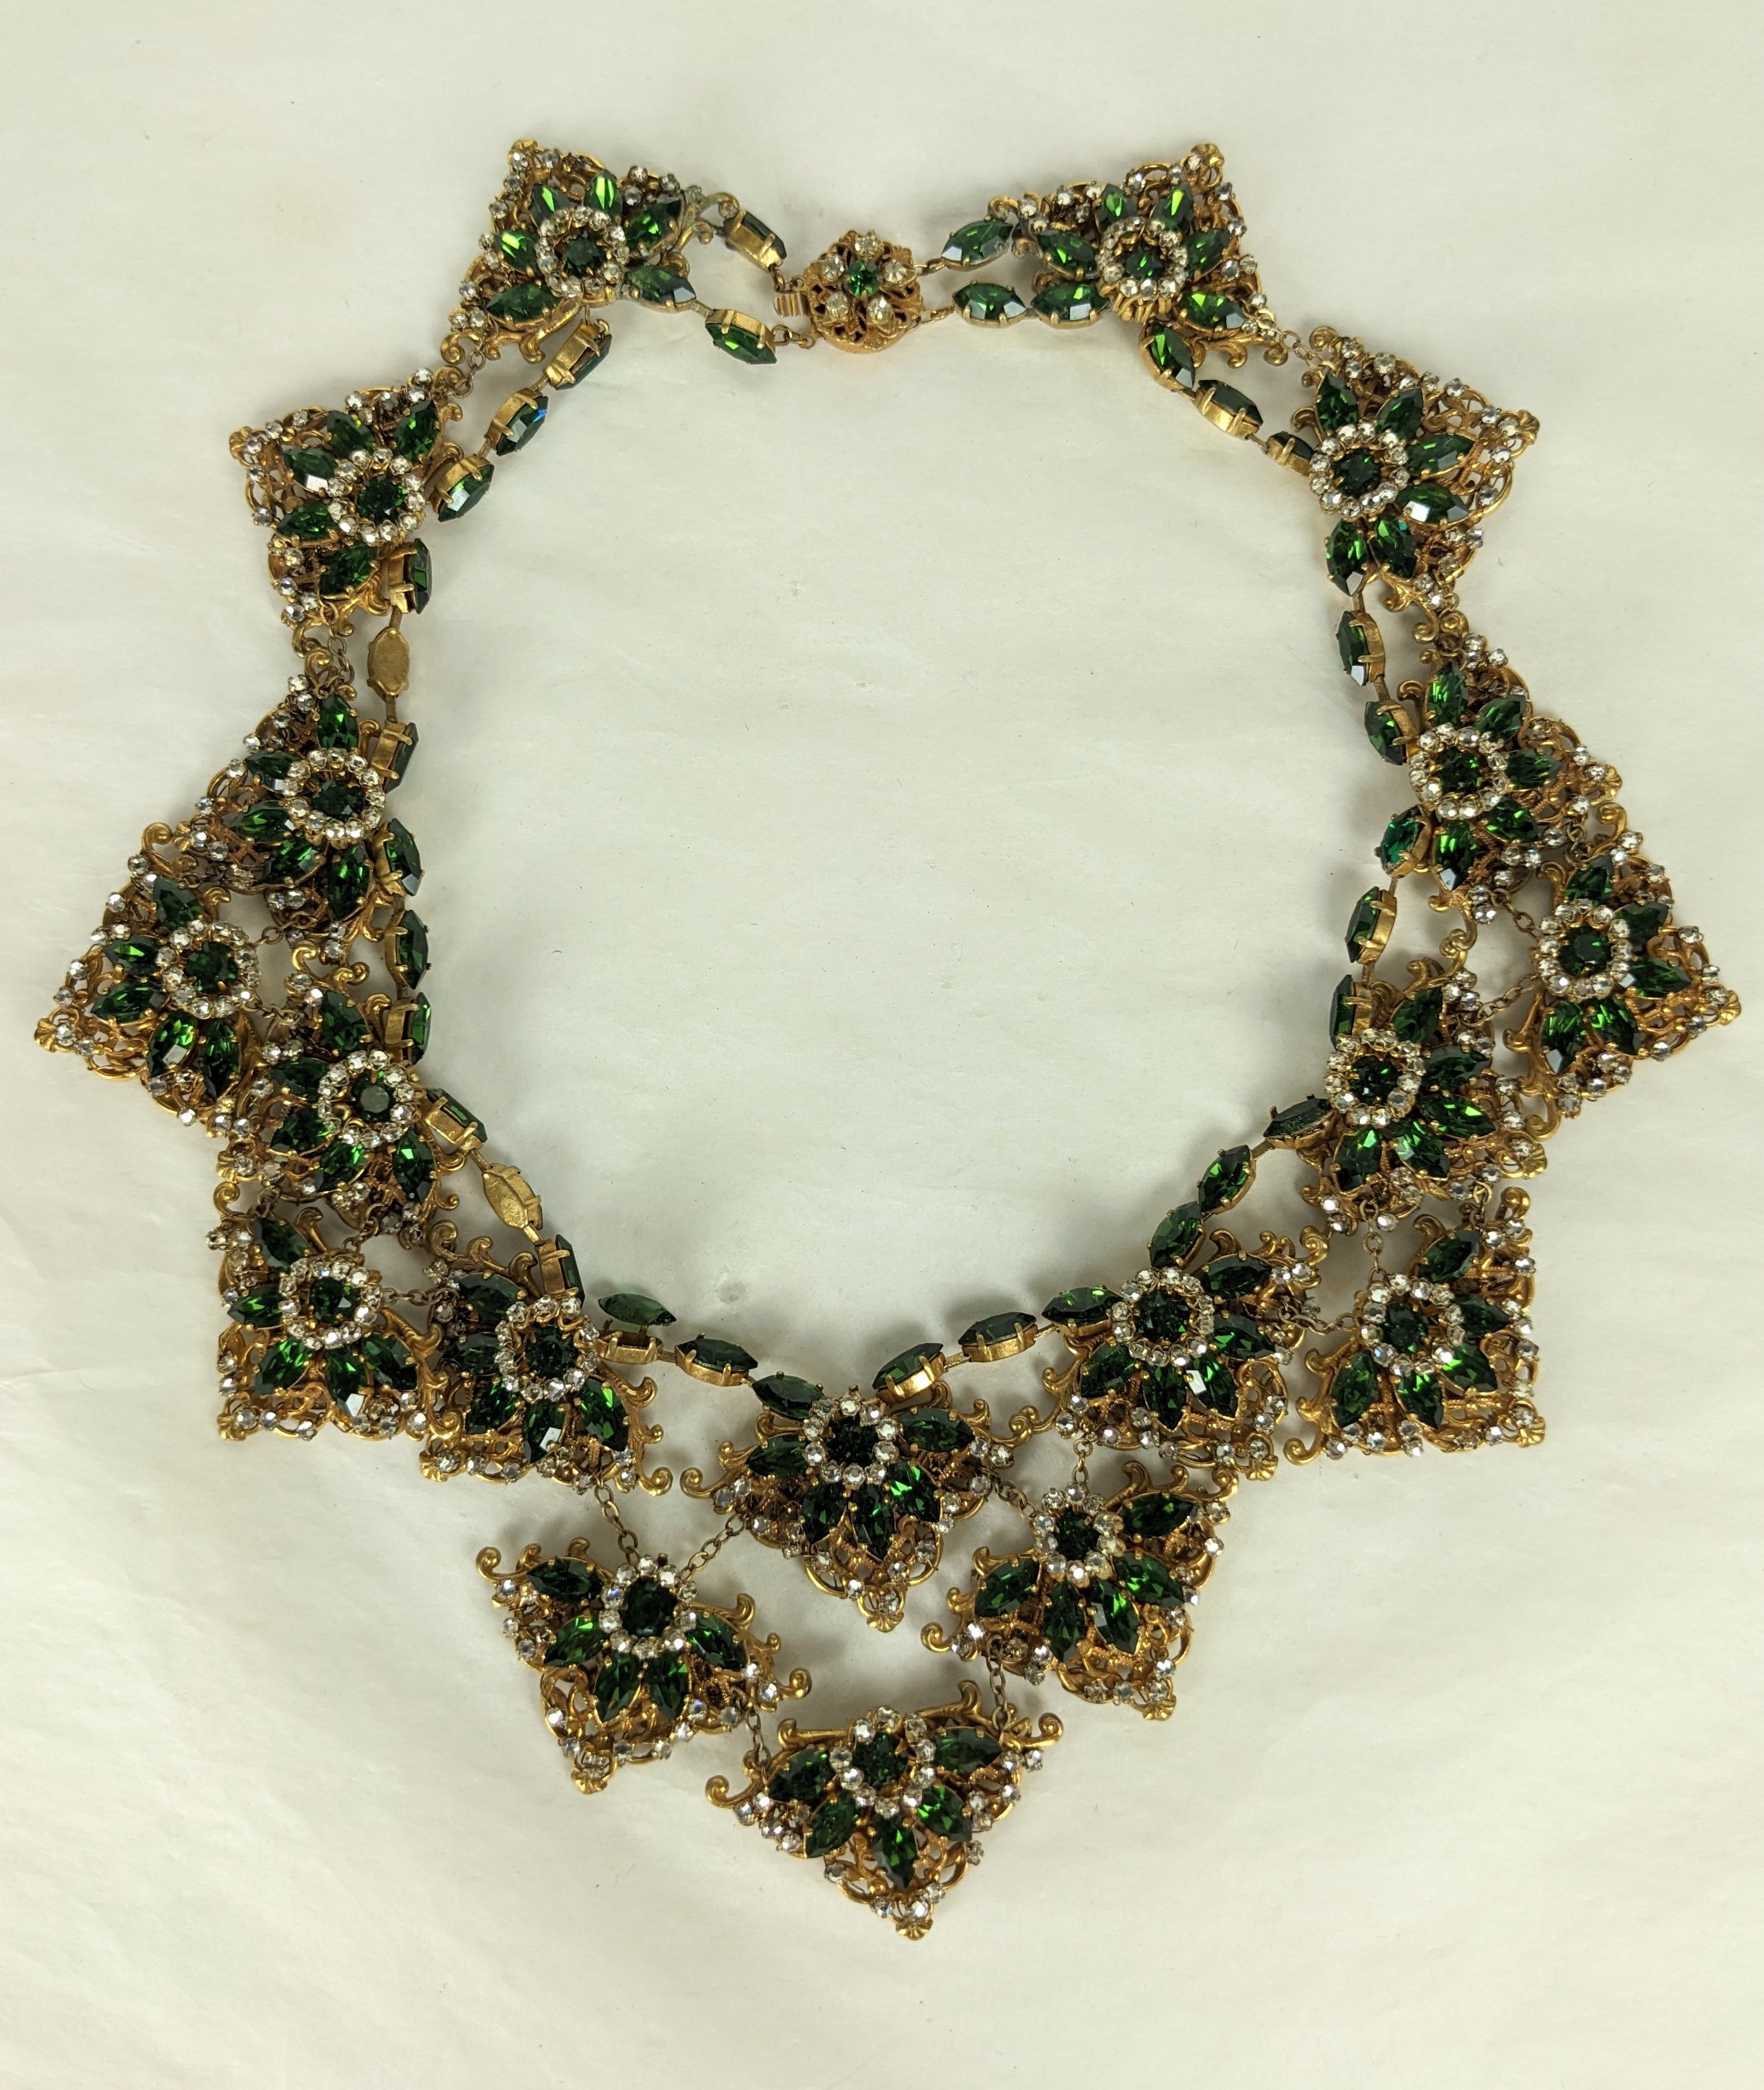 Impressive and Massive Miriam Haskell Bib of Olivine and Crystal Rose Montees from the 1950's. Triangular filigrees in Russian Gilt are sewn with olivine navettes and rose montee crystals. Each central floret has a olivine center with crystal